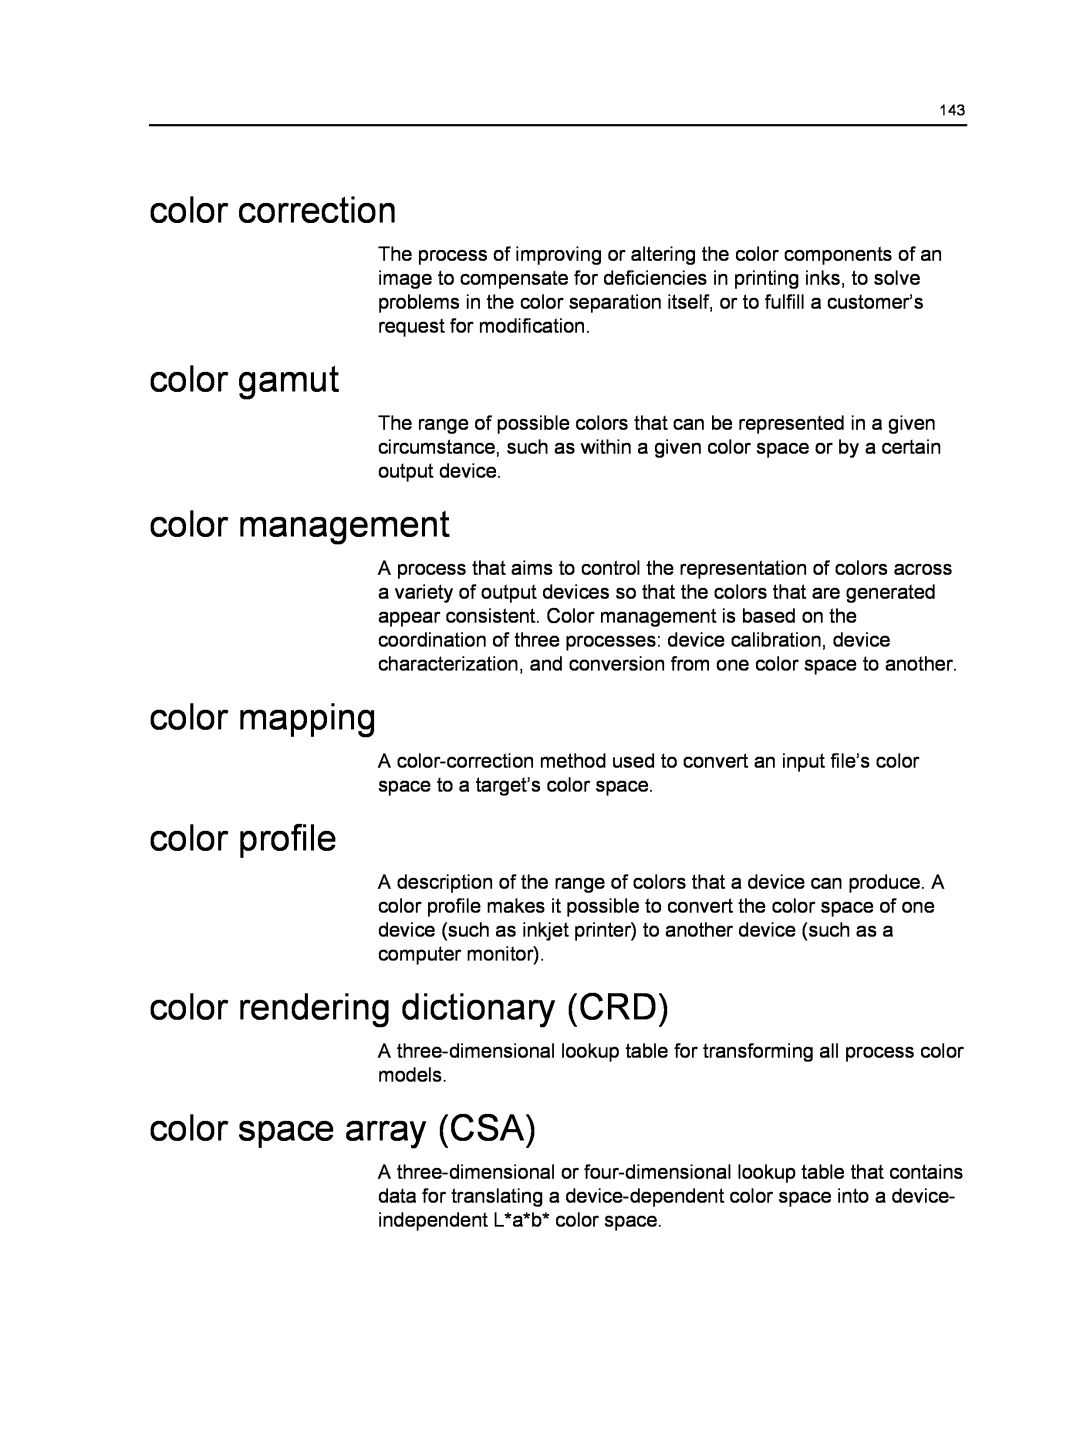 Xerox 550 color correction, color gamut, color management, color mapping, color profile, color rendering dictionary CRD 